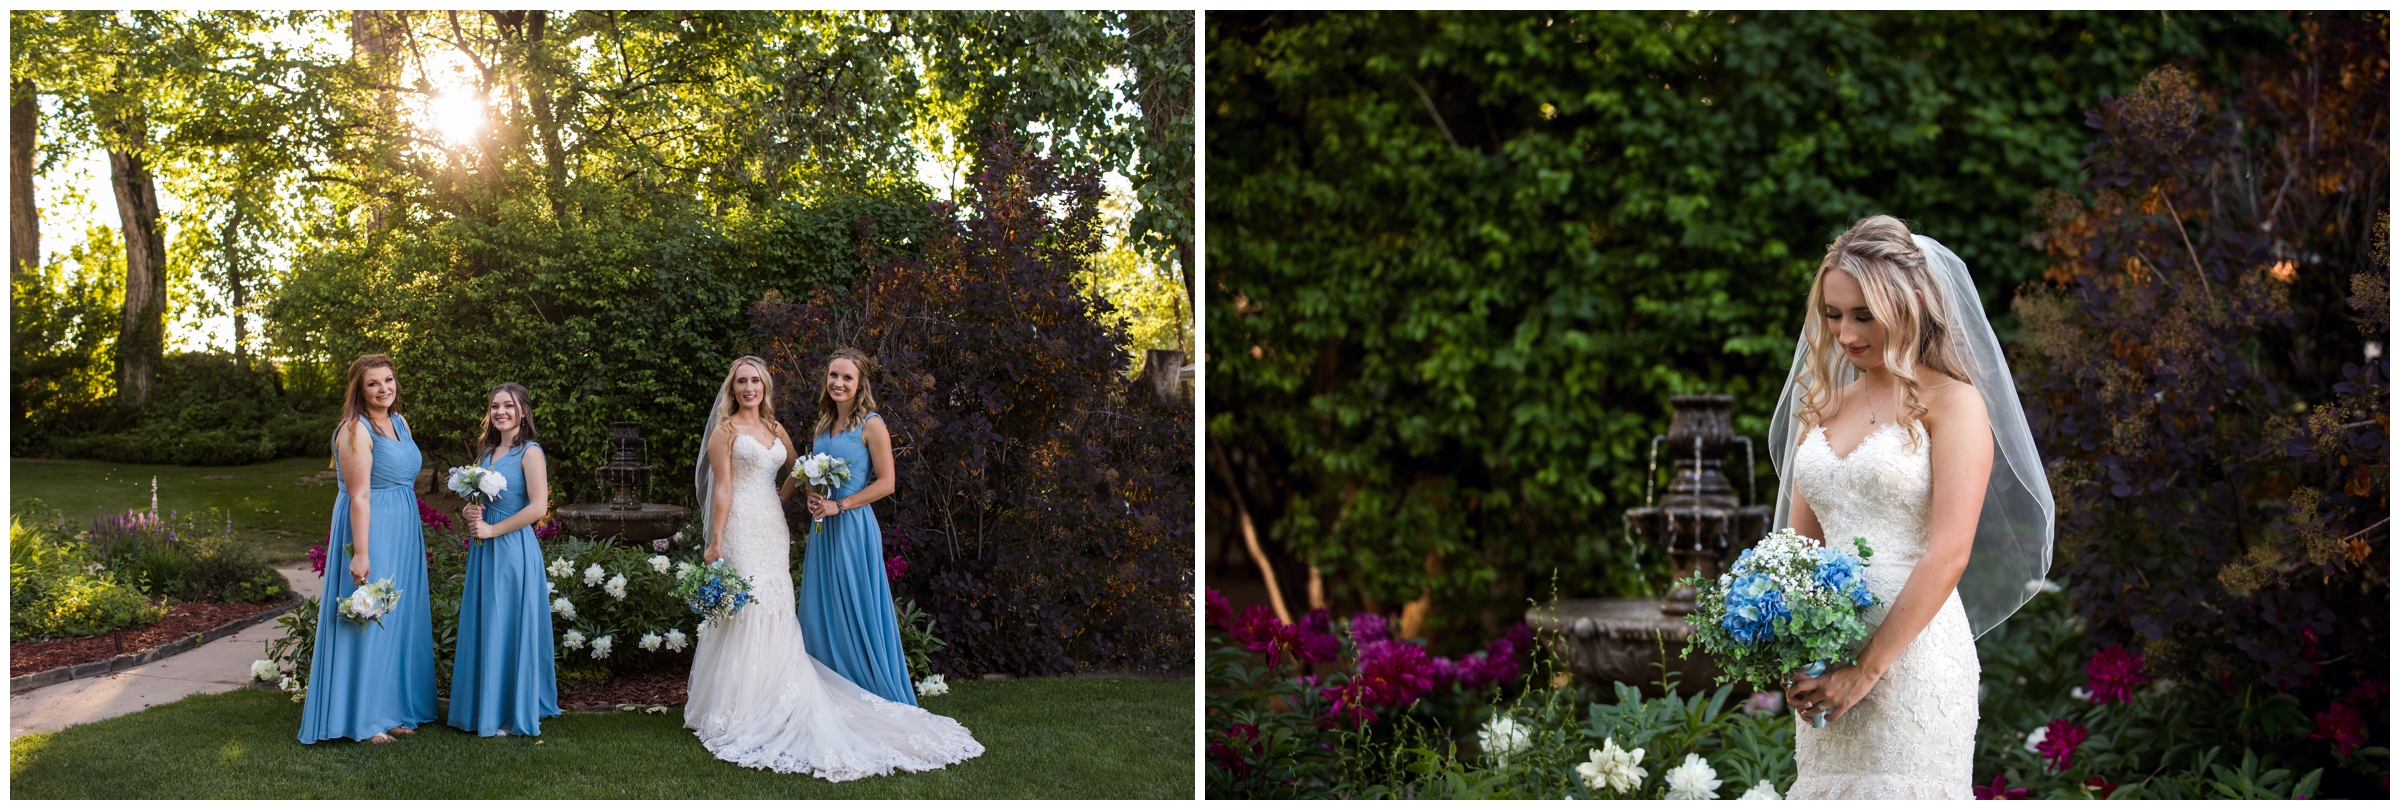 bride and bridesmaids in blue posing in gardens at Fort Collins Tapestry House wedding 